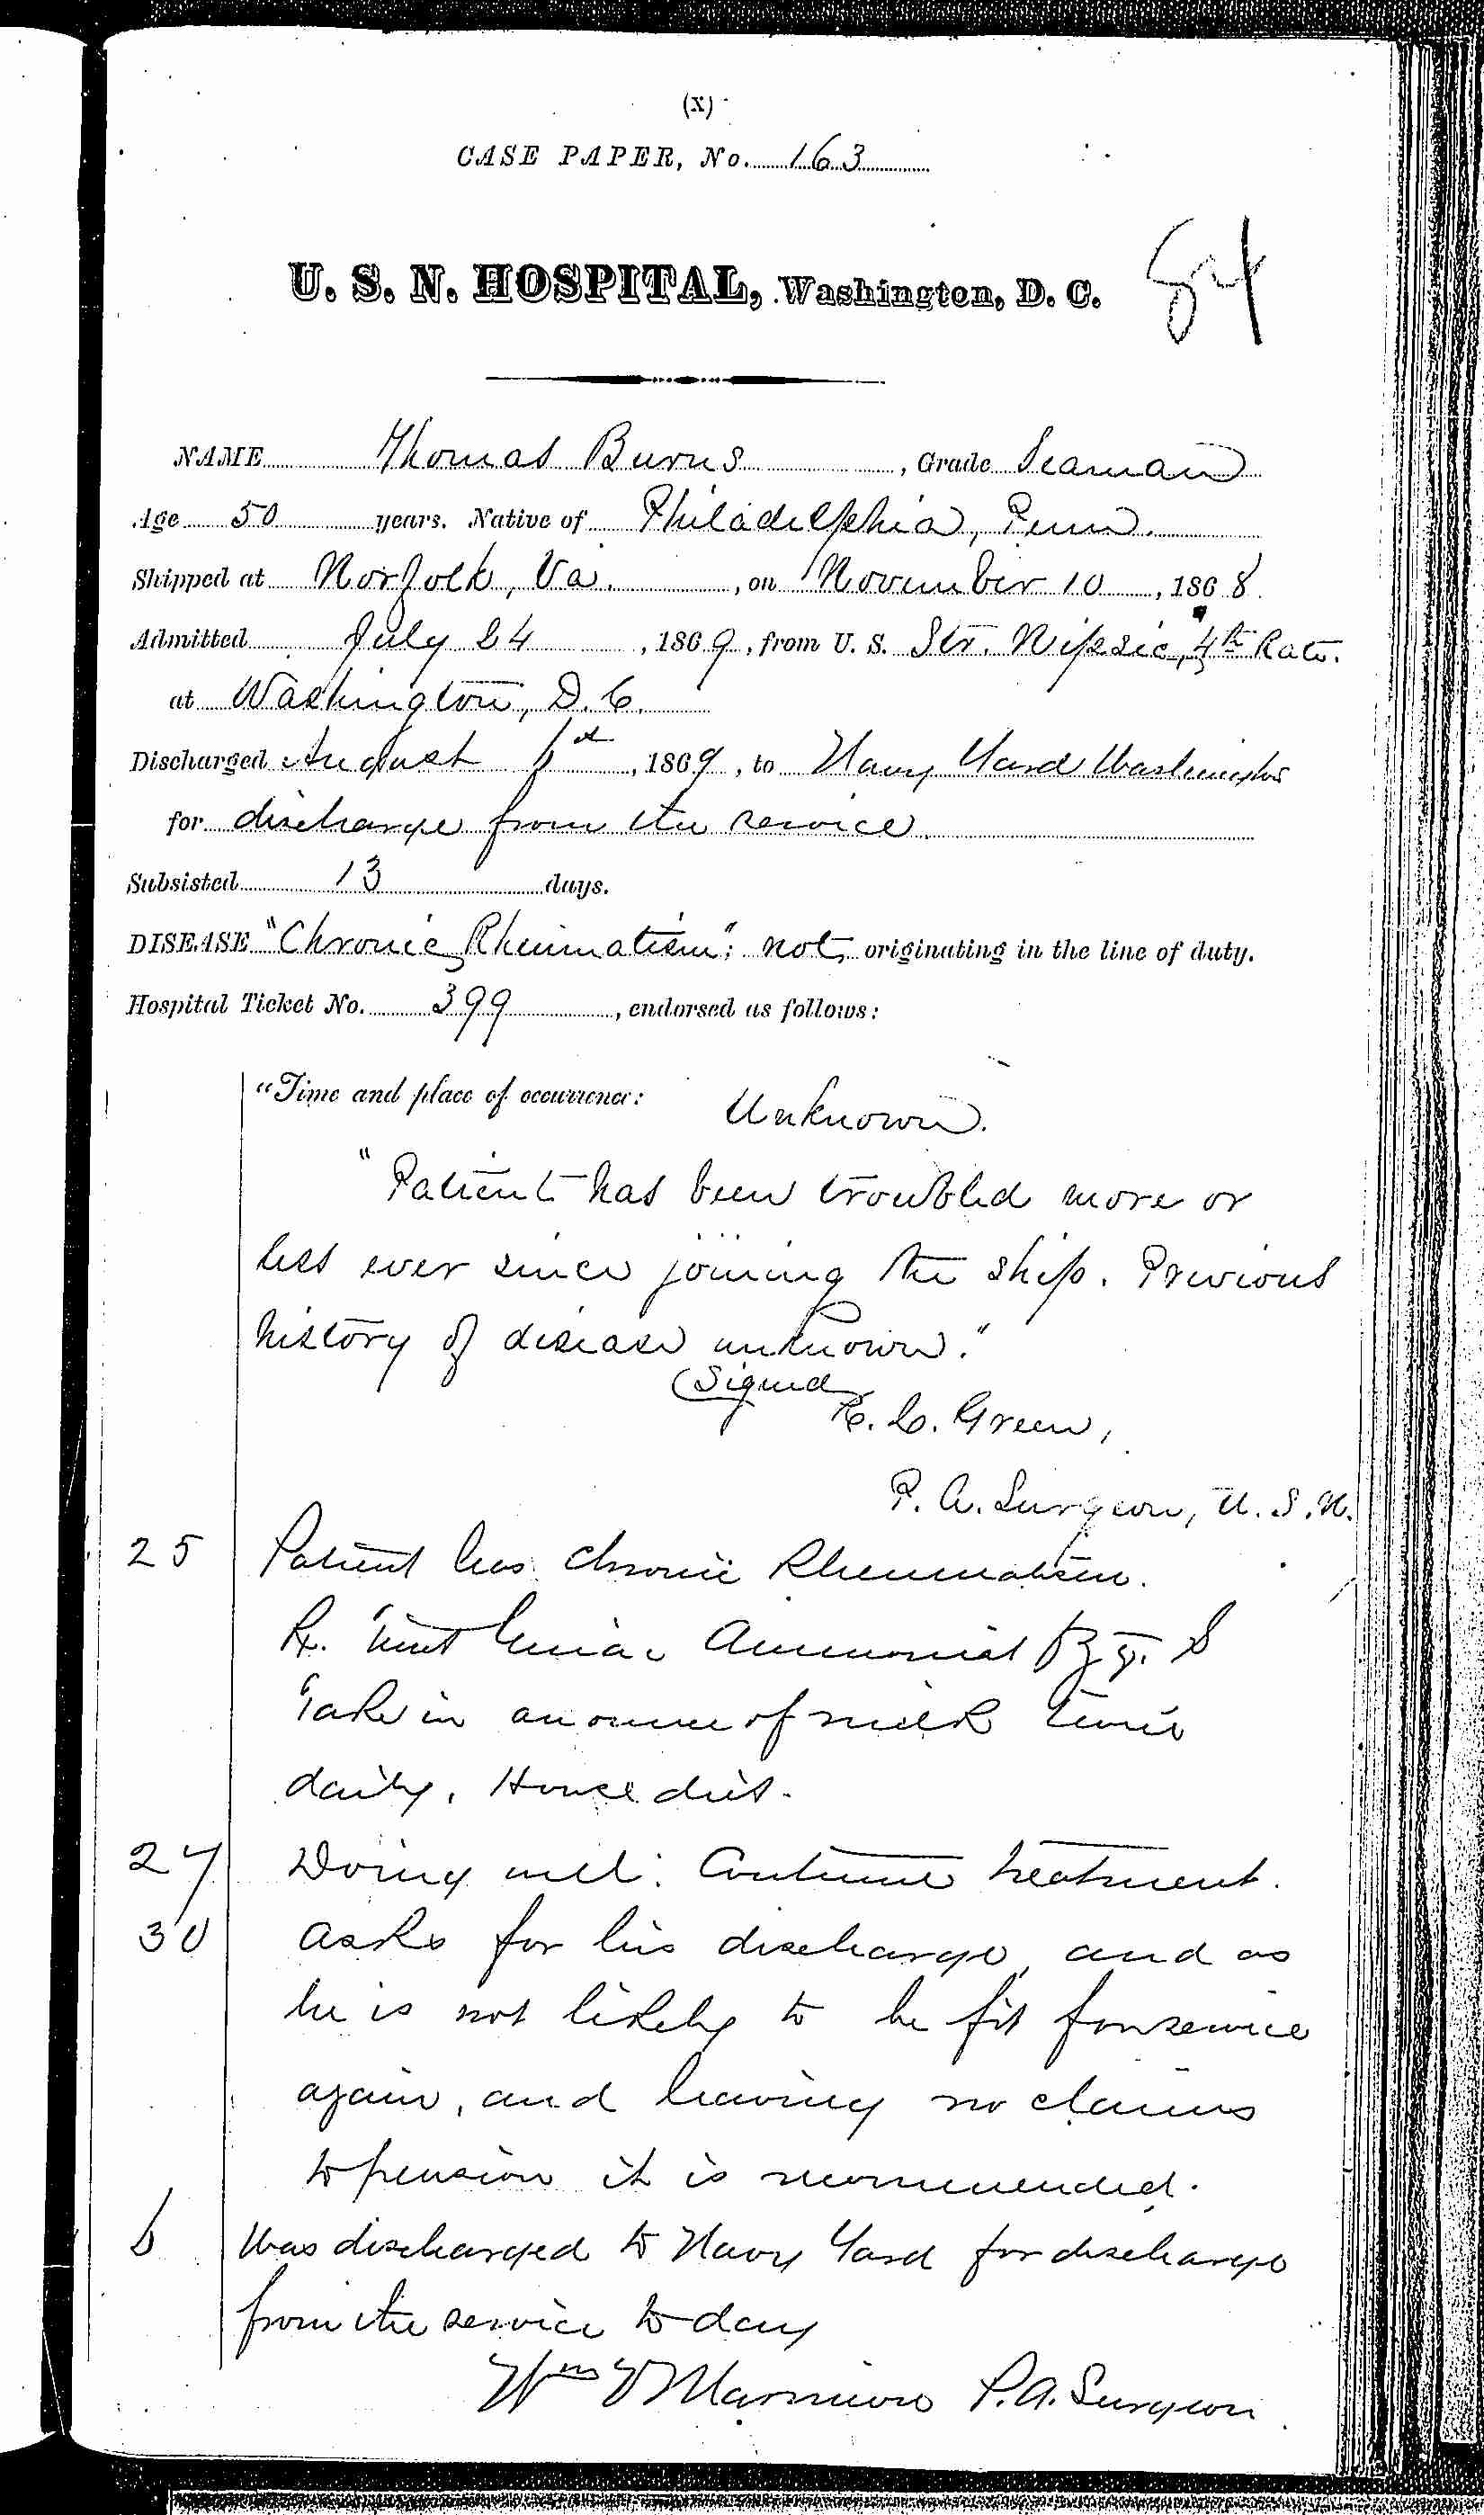 Entry for Thomas Burns (page 1 of 1) in the log Hospital Tickets and Case Papers - Naval Hospital - Washington, D.C. - 1868-69